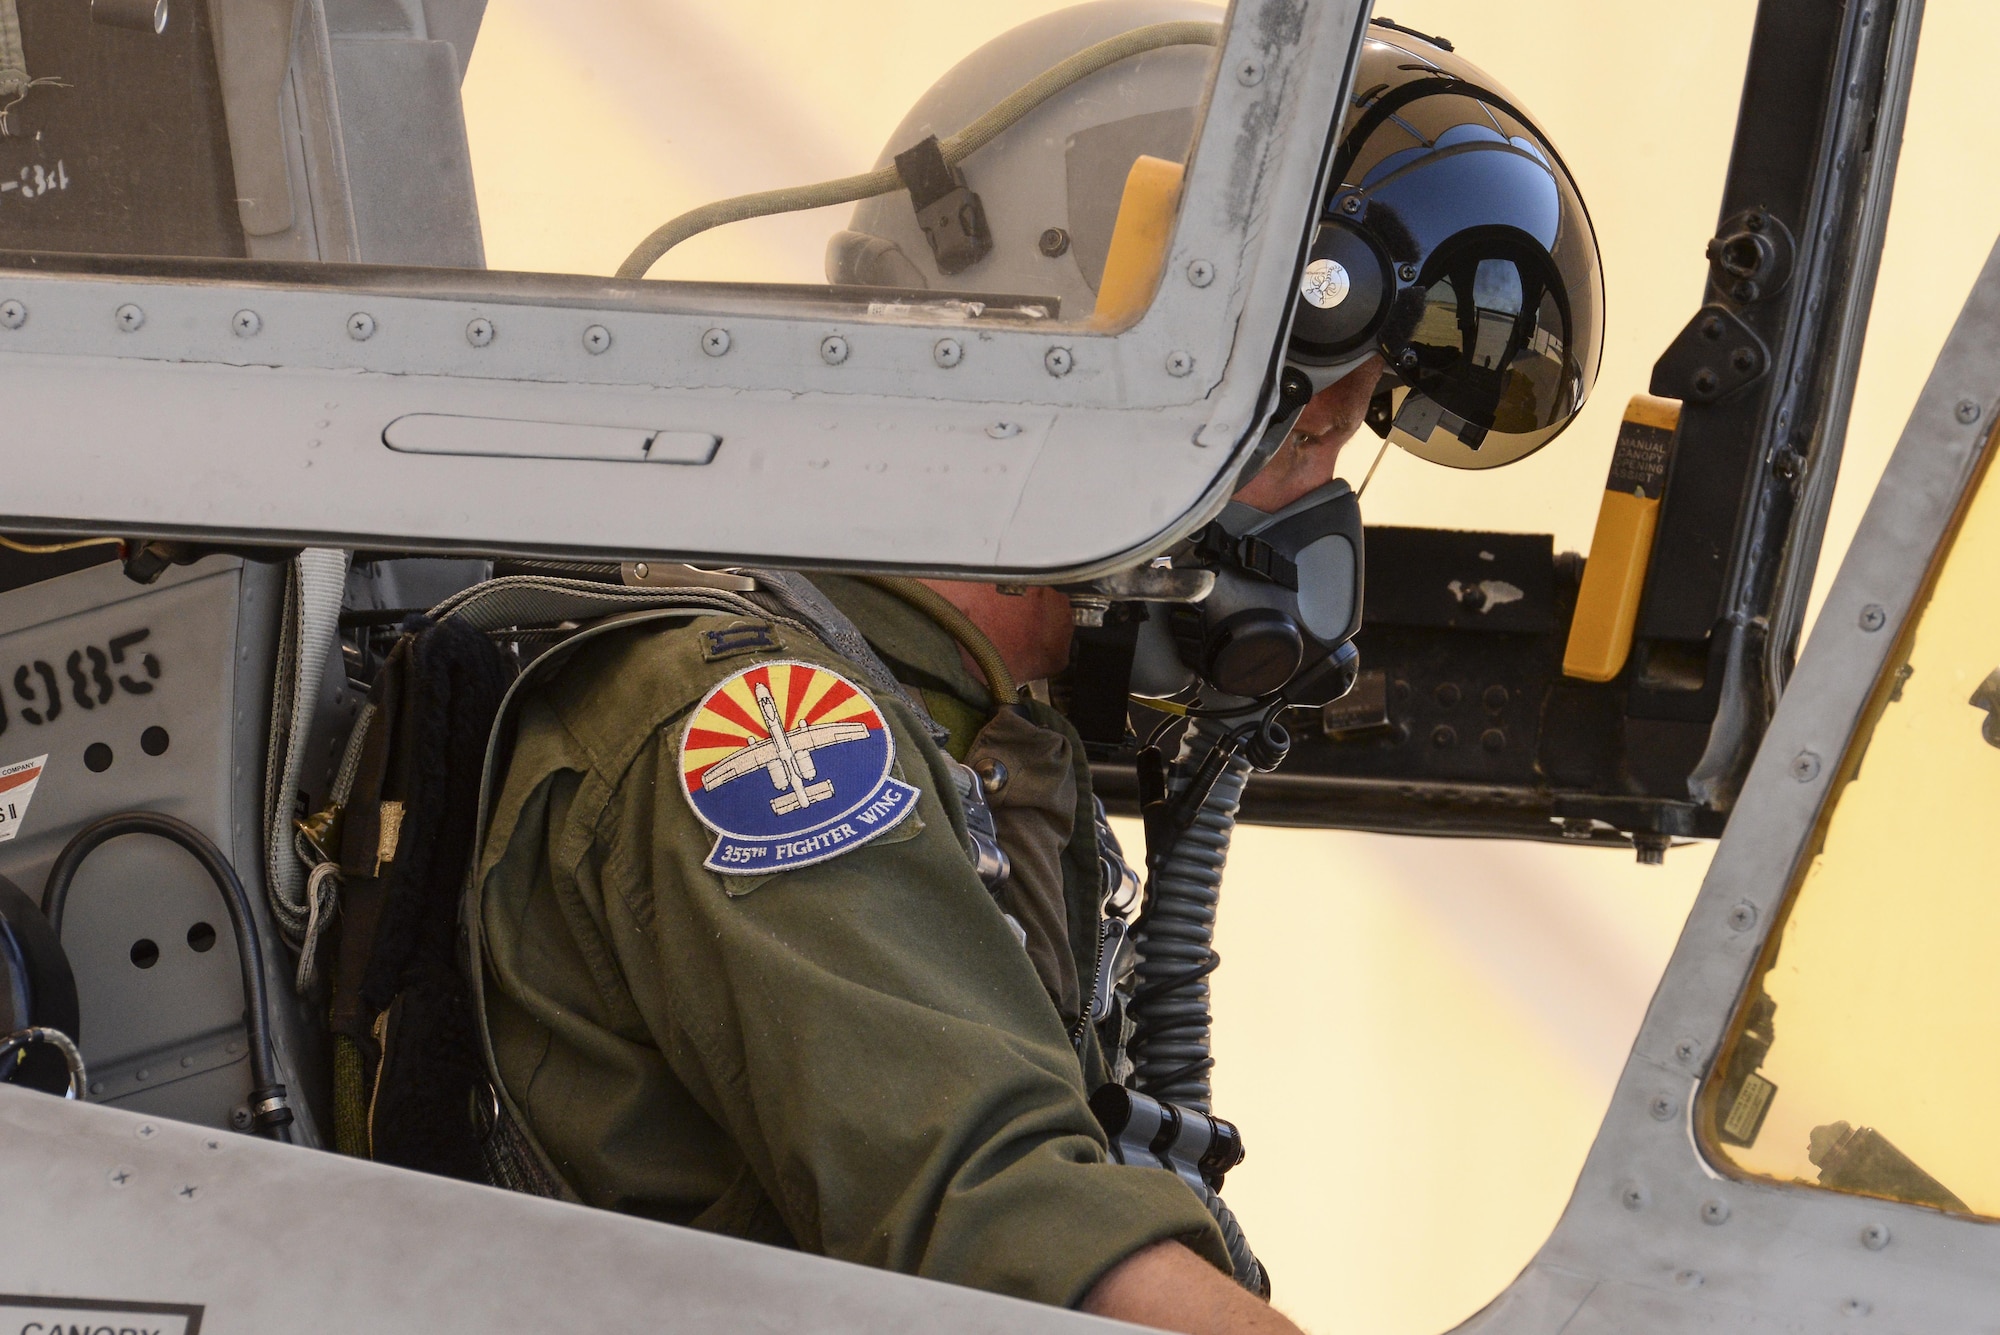 U.S. Air Force Capt. Michael McCarthy, 354th Fighter Squadron A-10C Thunderbolt II pilot, prepares to take off from Davis-Monthan Air Force Base, Ariz., July 14, 2017. The A-10 has provided close air support in worldwide operations for the past three decades. (U.S. Air Force photo by Senior Airman Mya M. Crosby)